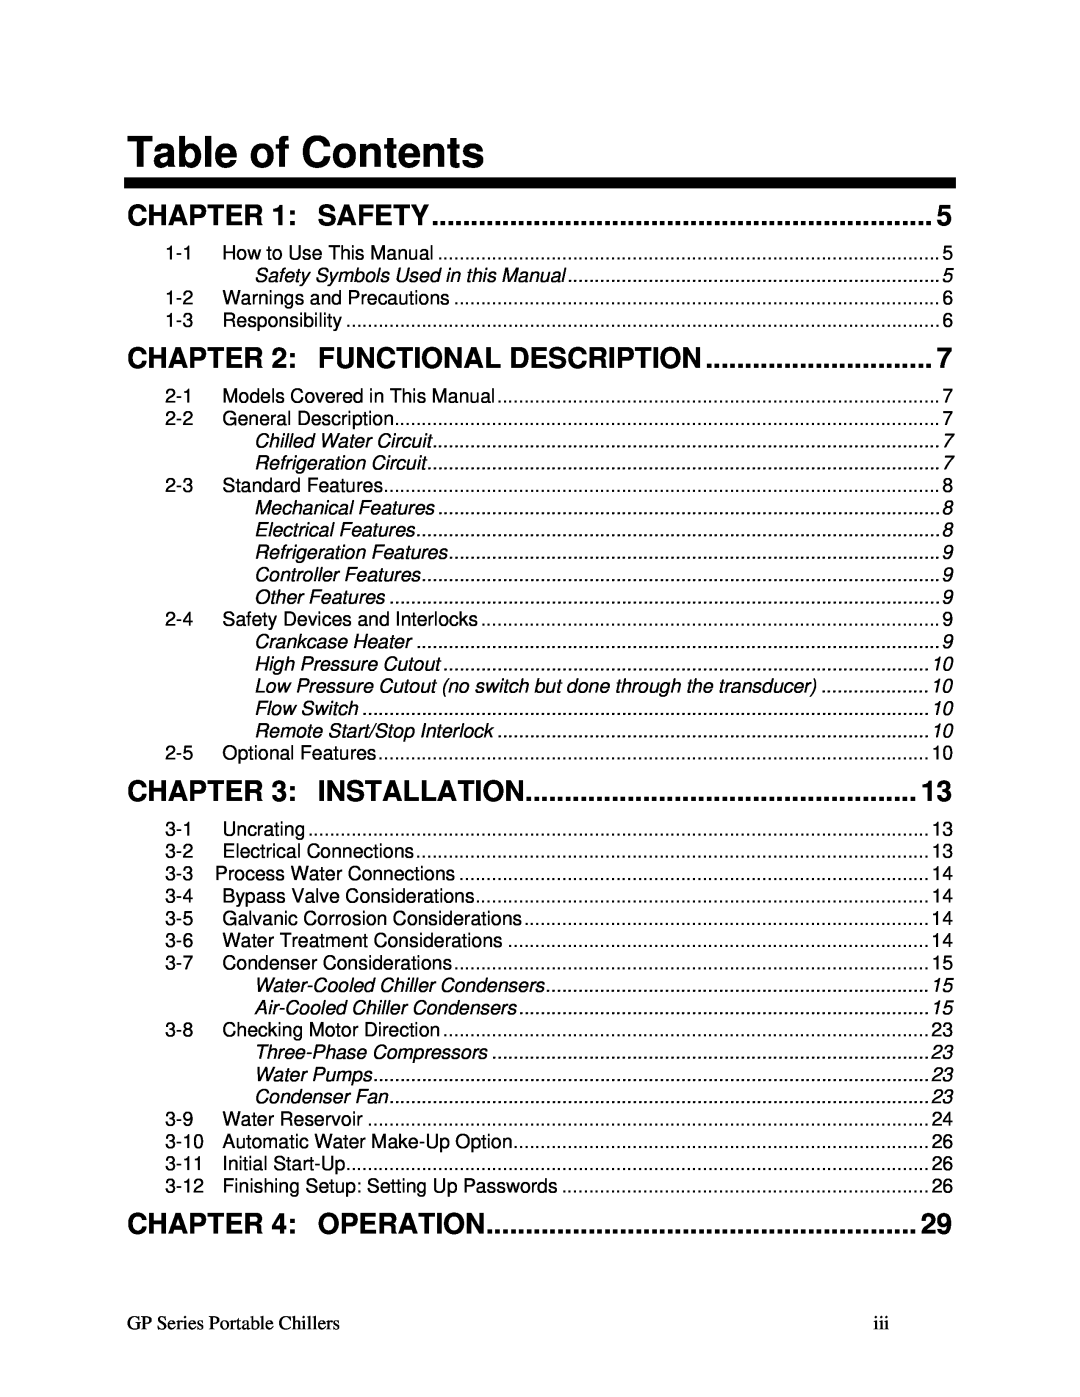 Sterling 882.93092.00 Table of Contents, Safety, Functional Description, Installation, Operation, Flow Switch, Water Pumps 